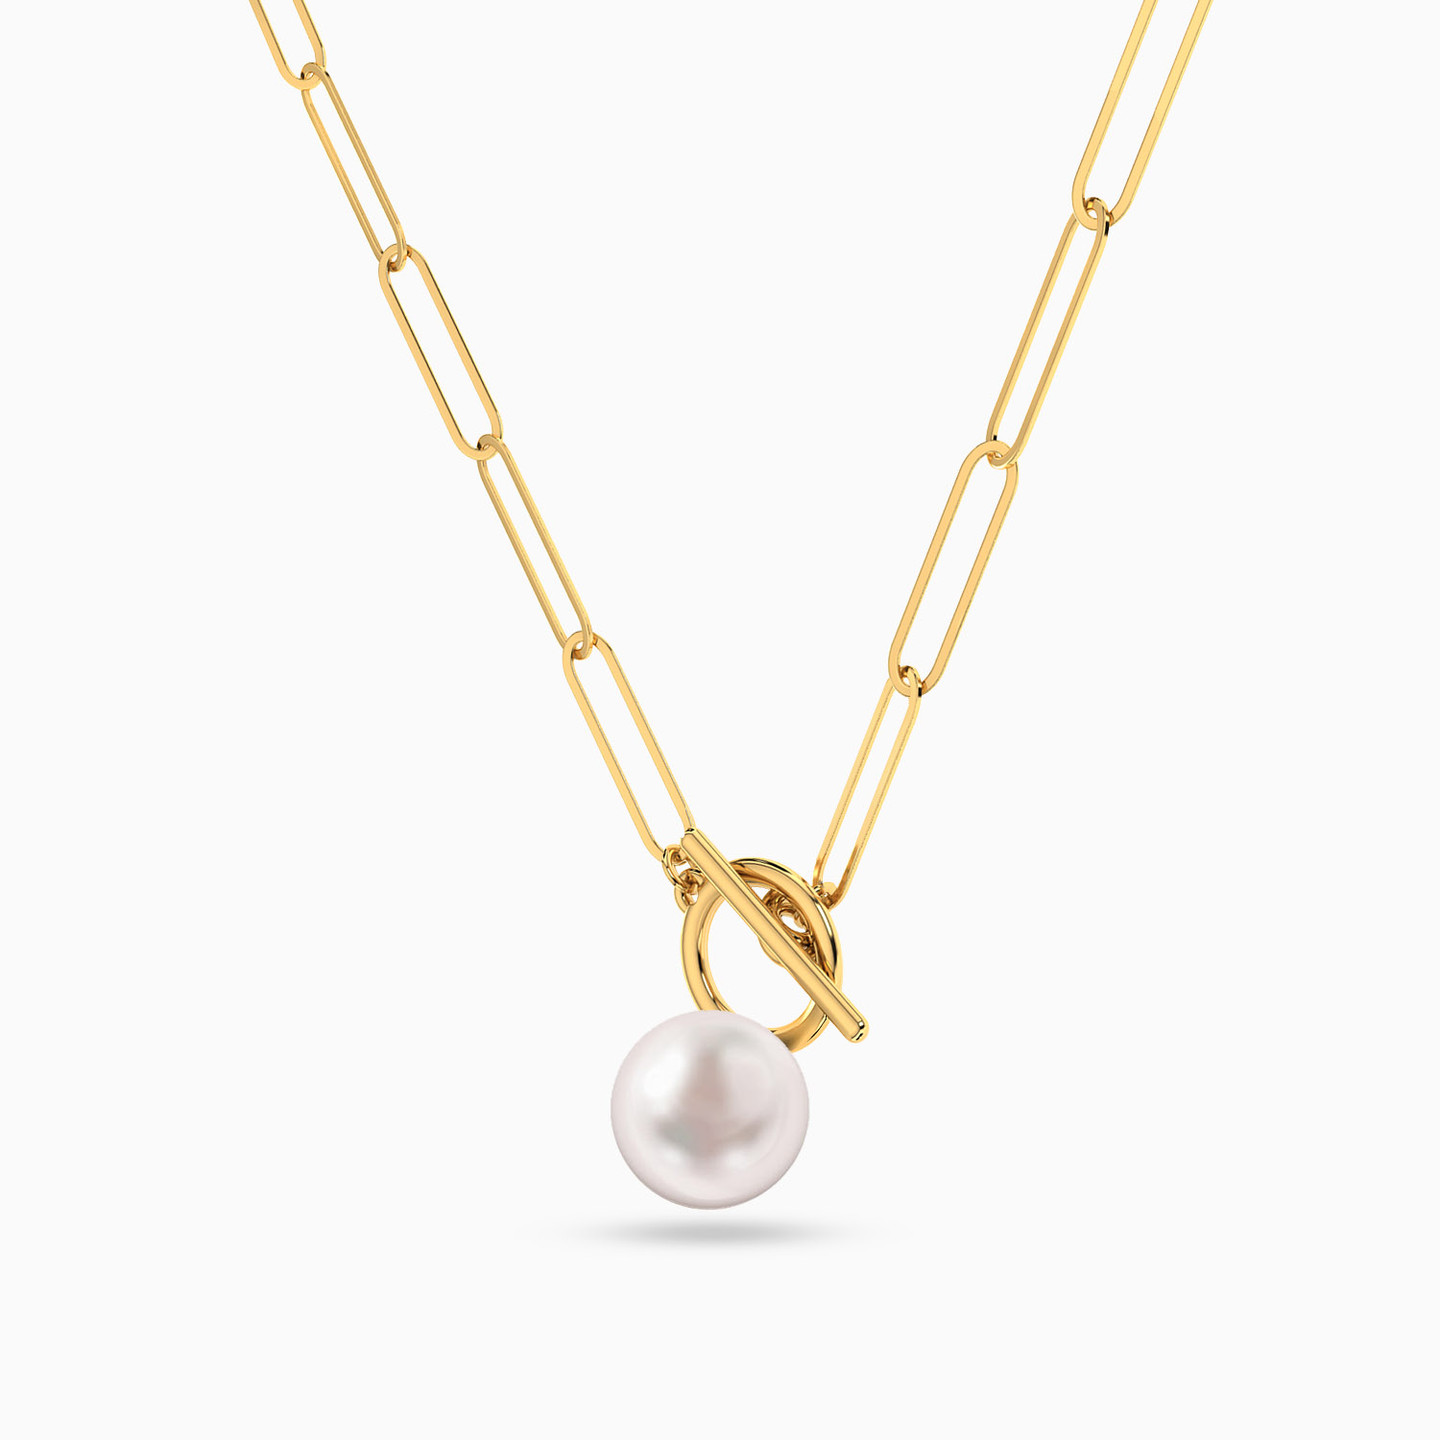 18K Gold Pearls Pendant Necklace - 5